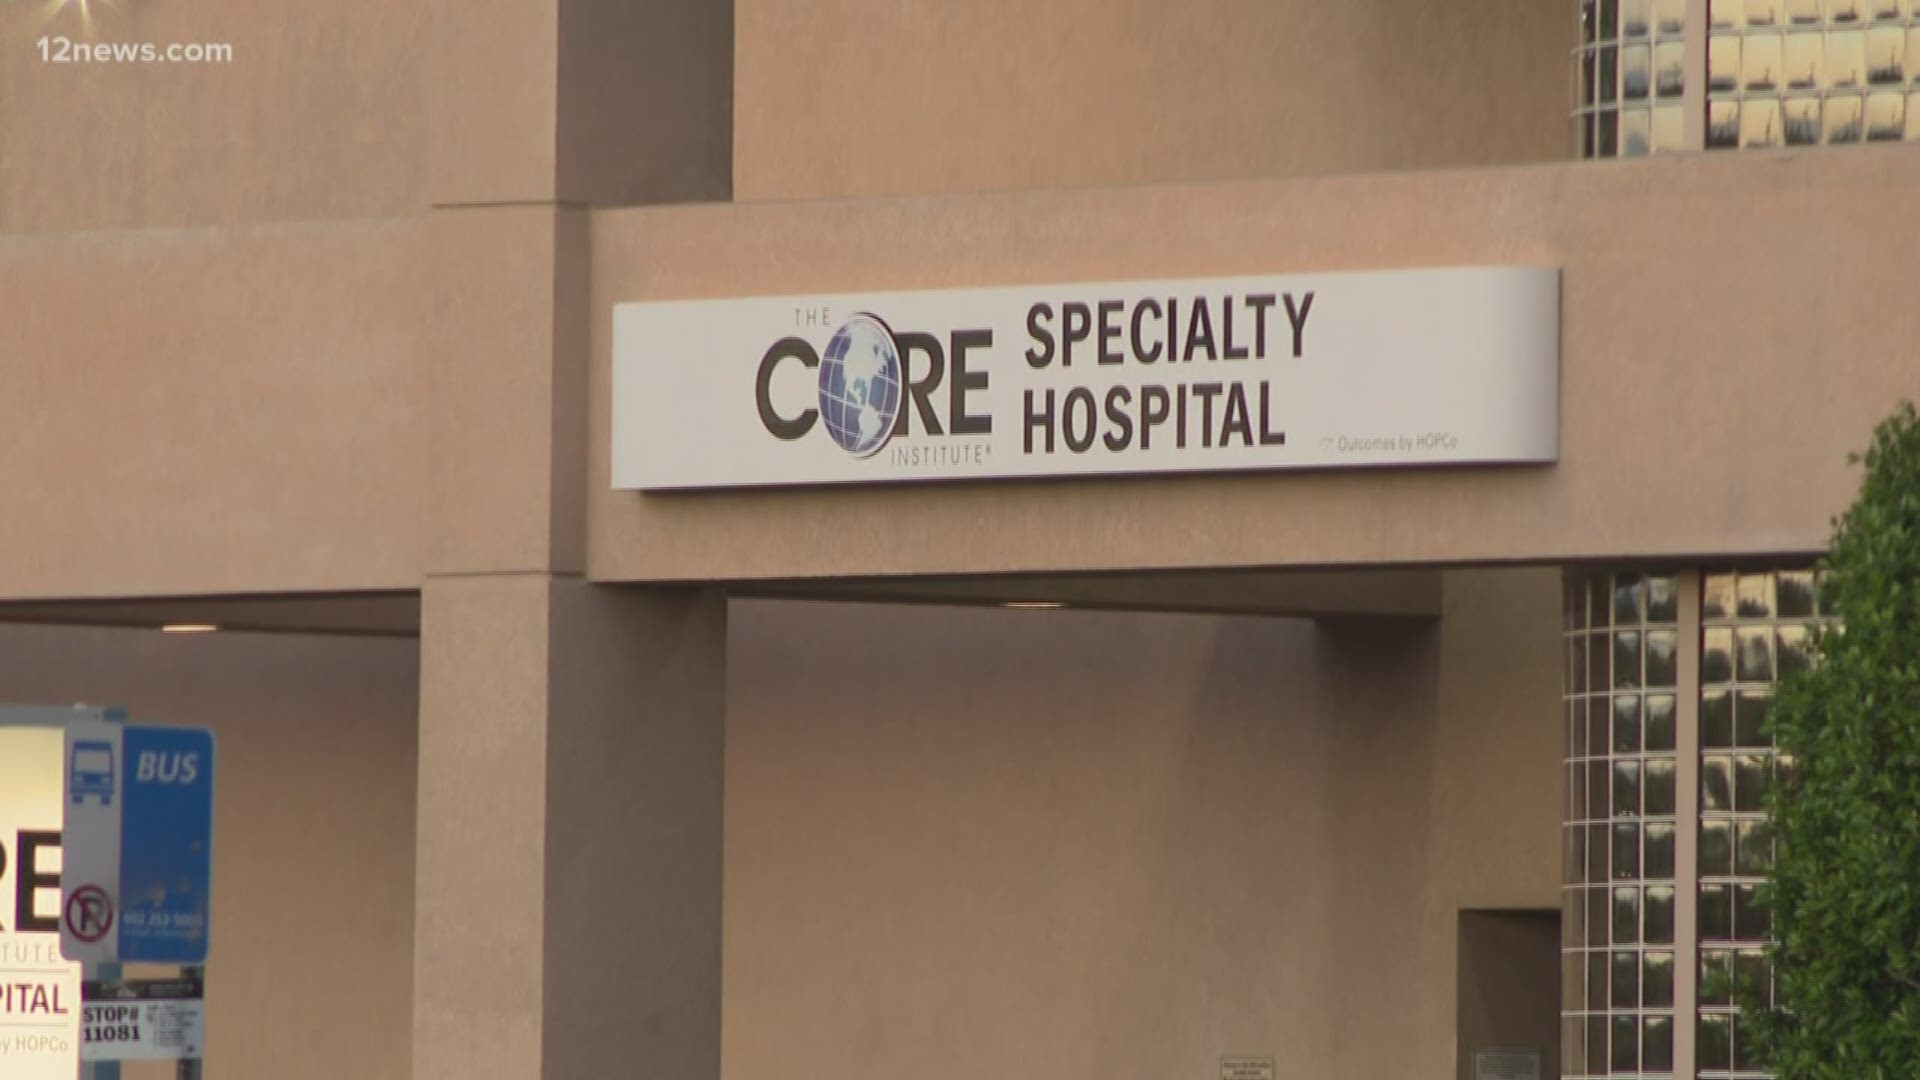 Arizona is getting help from the Army Corps of Engineers to make sure we have more beds for coronavirus patients in the coming weeks.